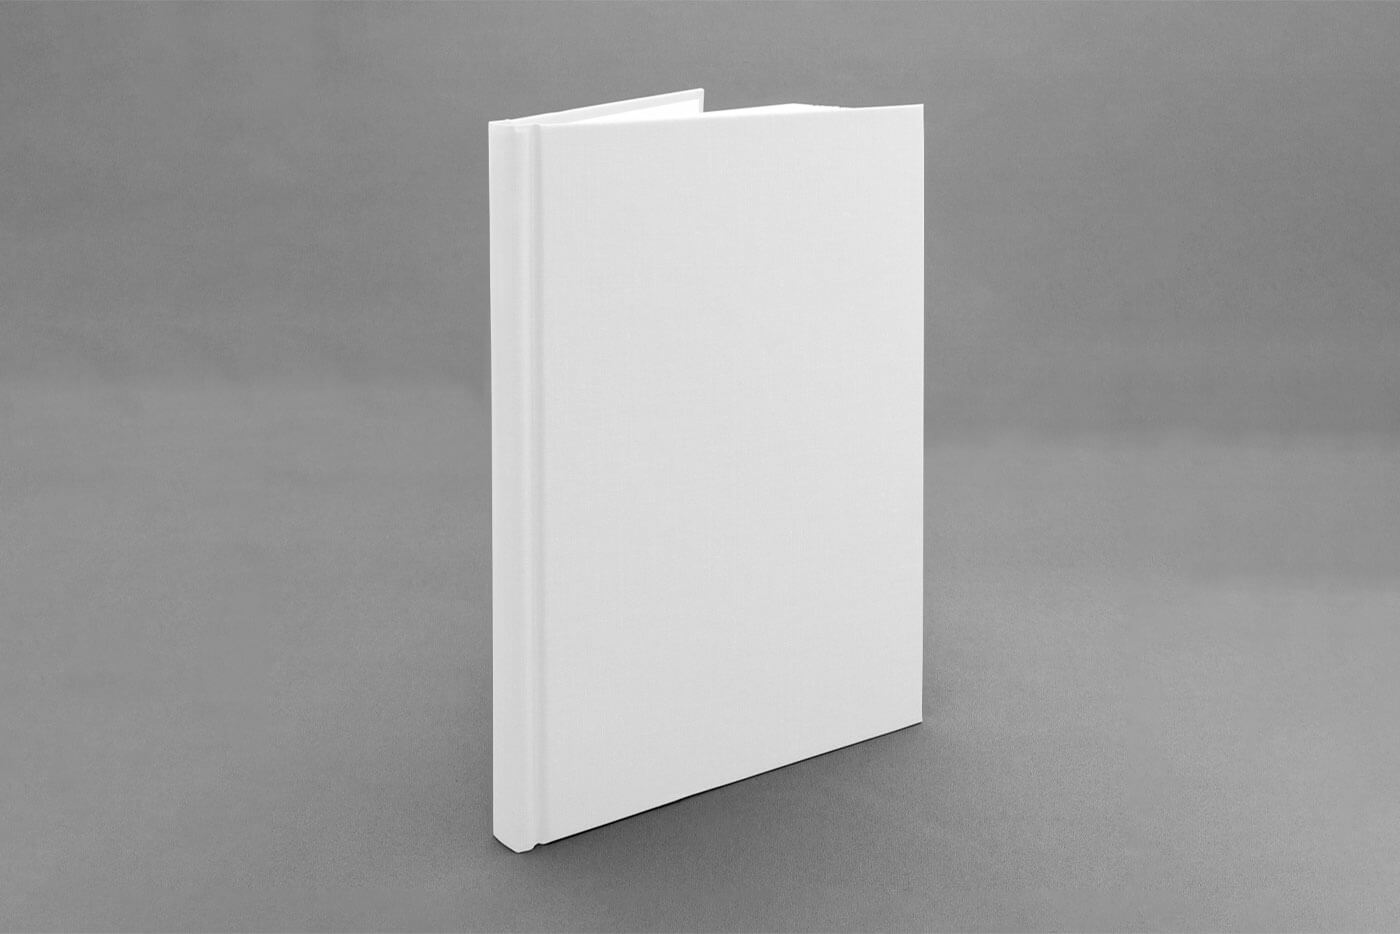 Standing Open Notebook Cover Mockup